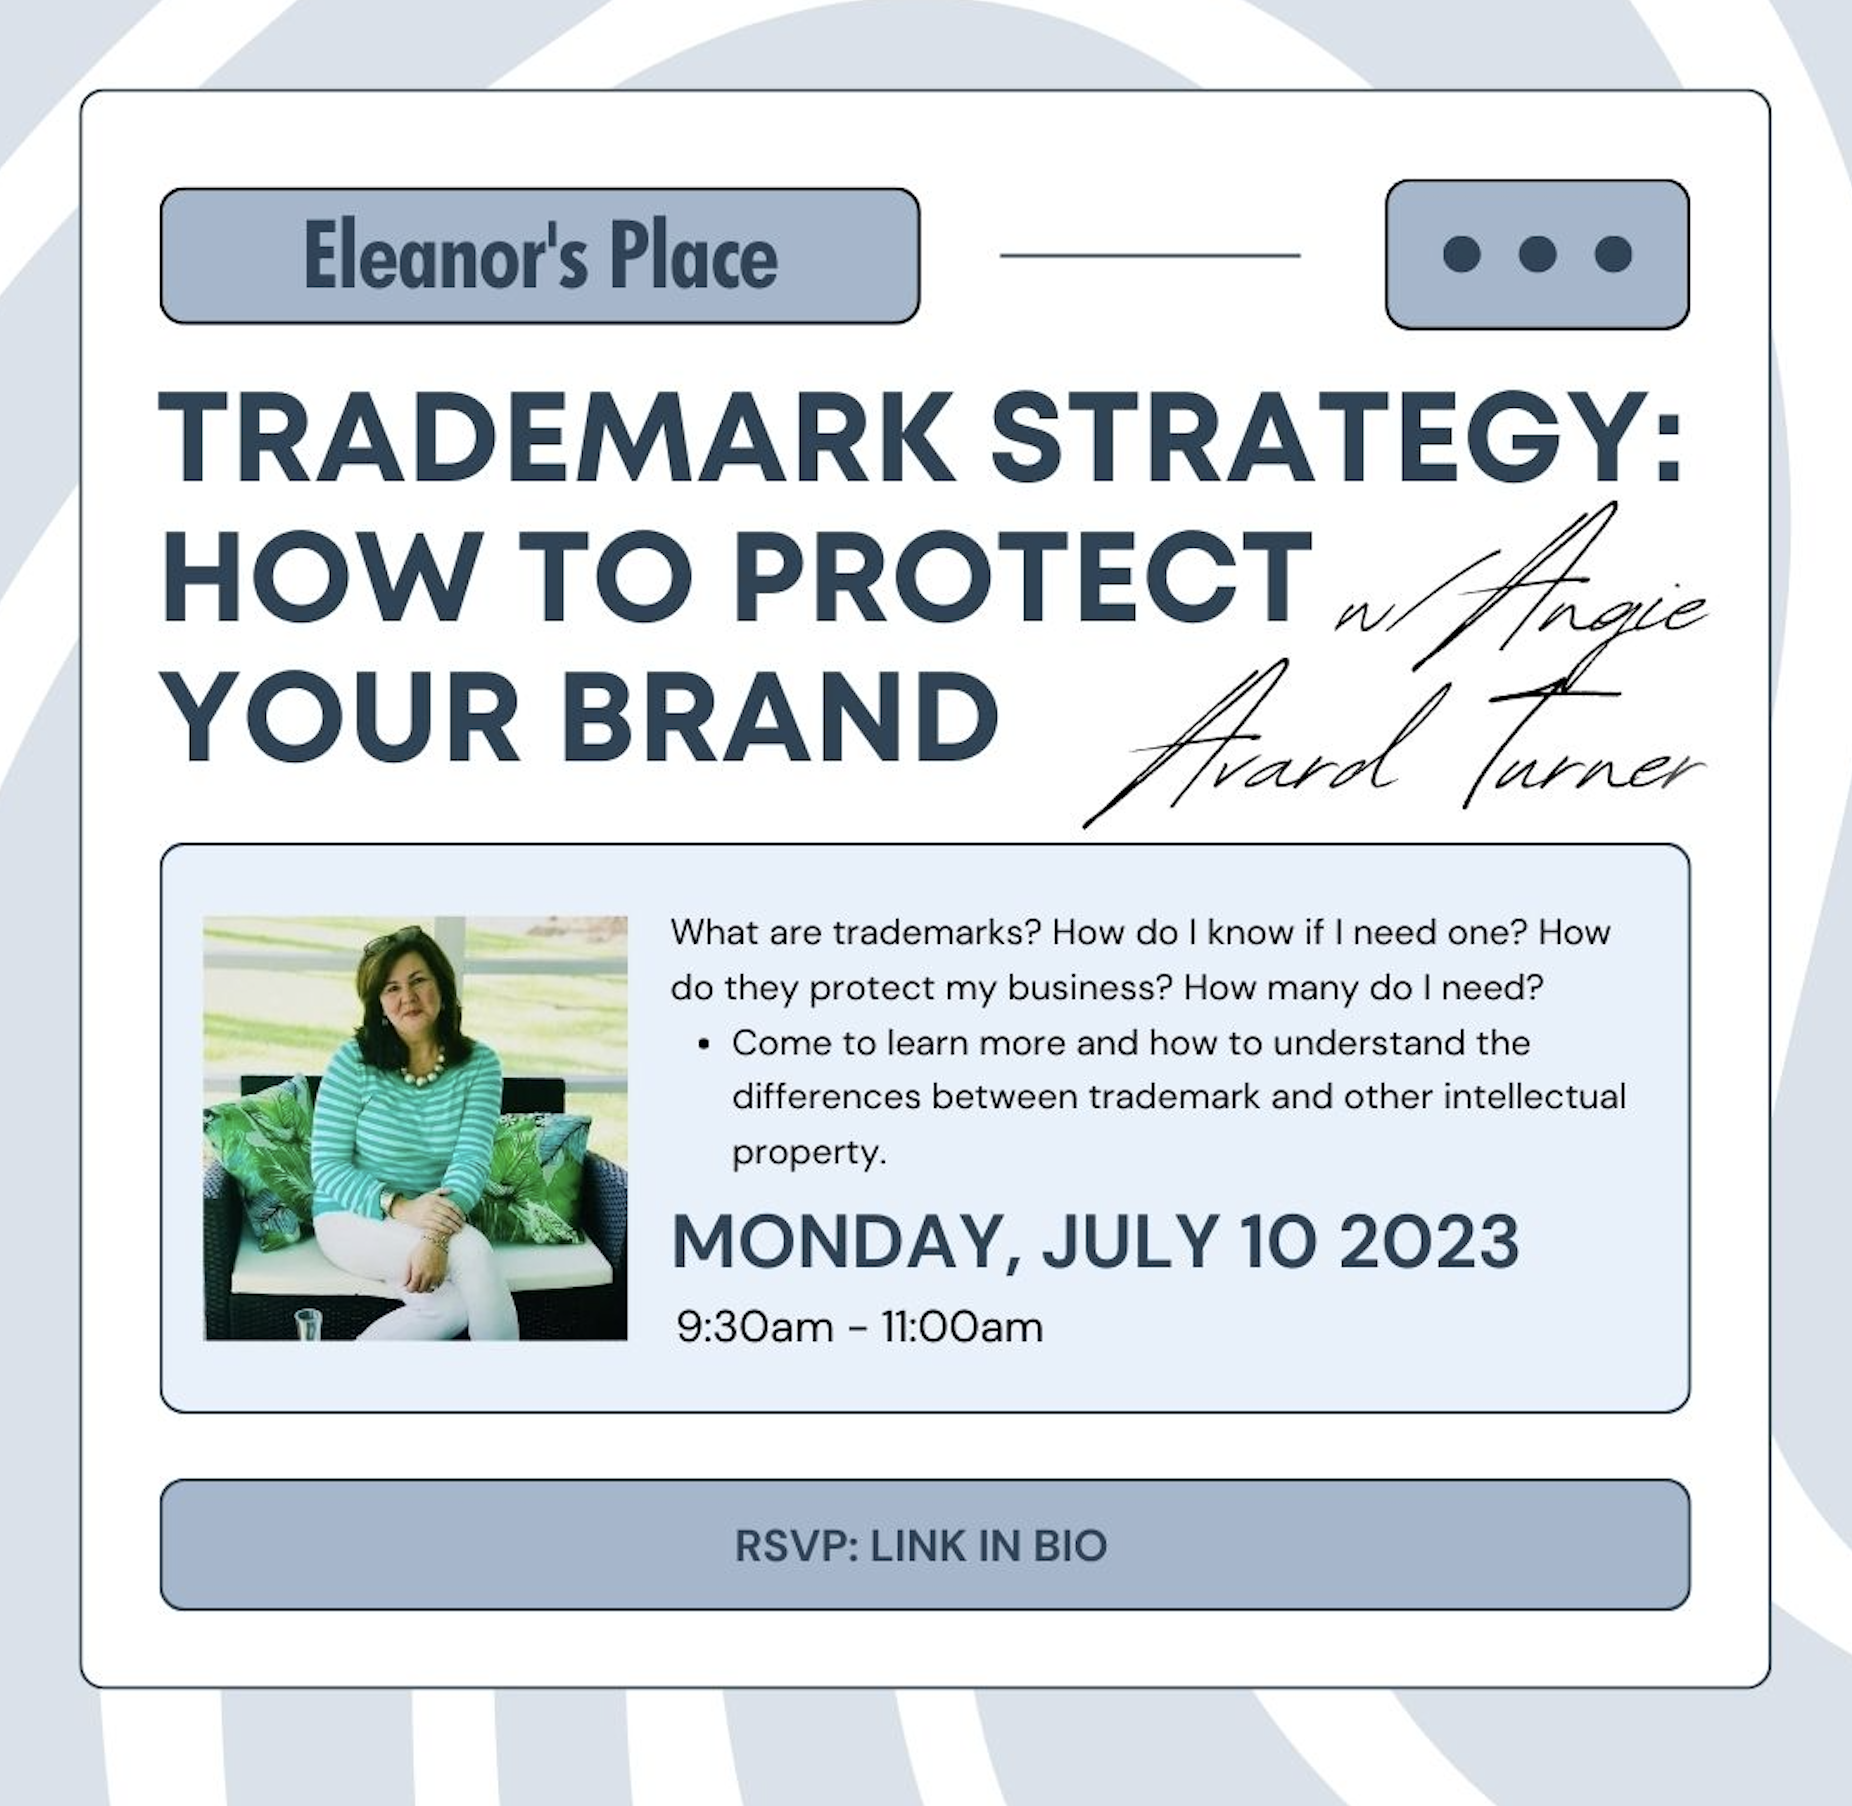 Trademark Strategy - How to Protect Your Brand